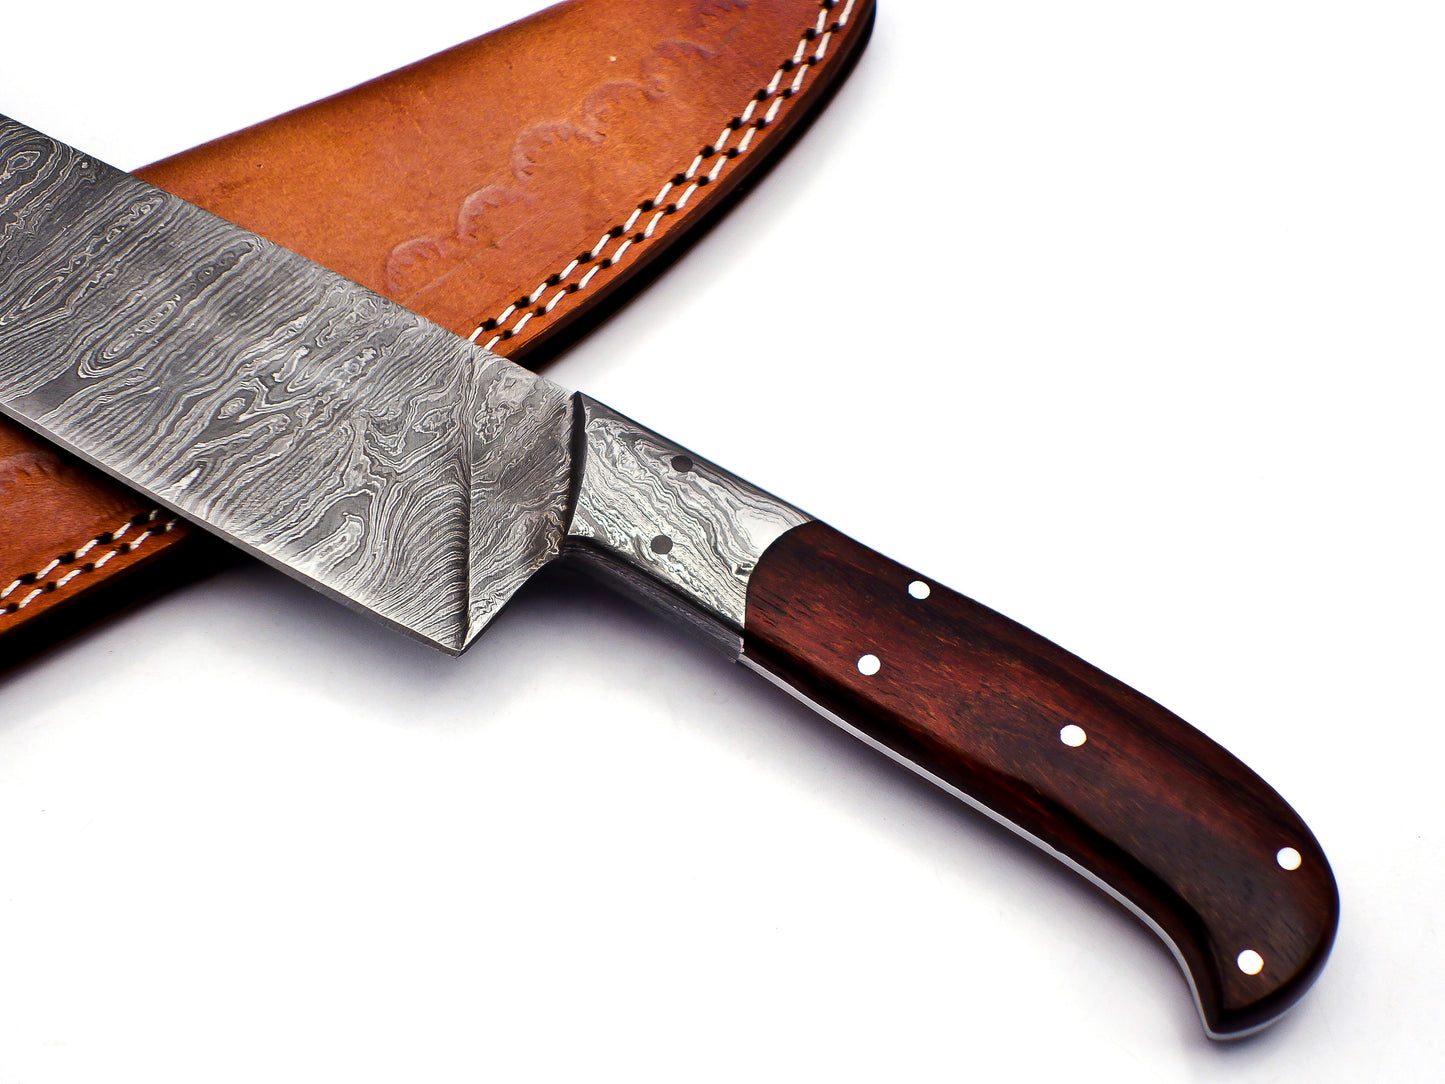 "Premium Rosewood Handle Full Tang Damascus Steel Chef's Knife 12" With Leather Sheath